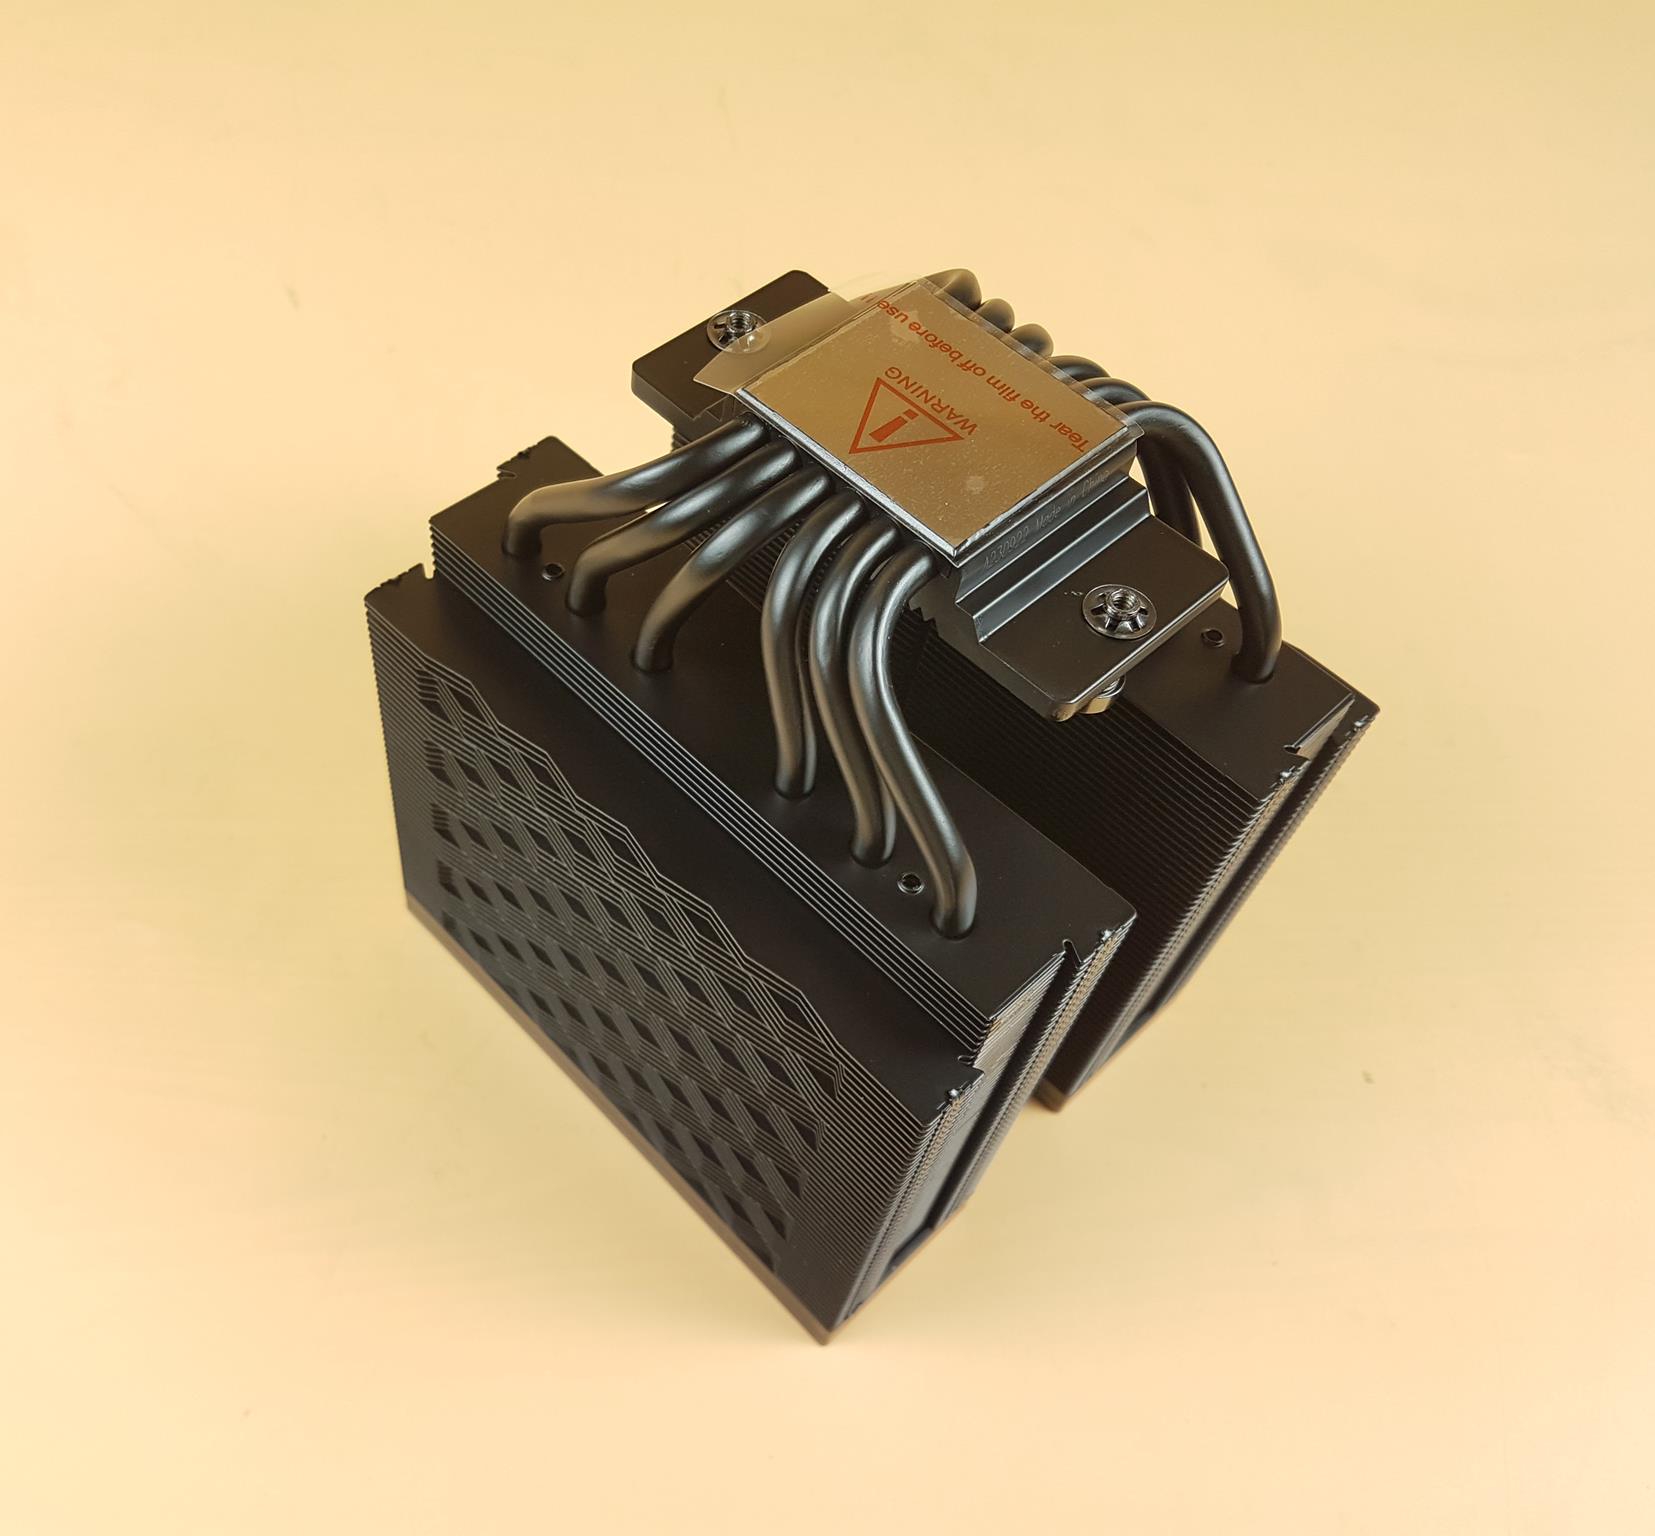 PCCOOLER CPS RZ620 Heat pipes